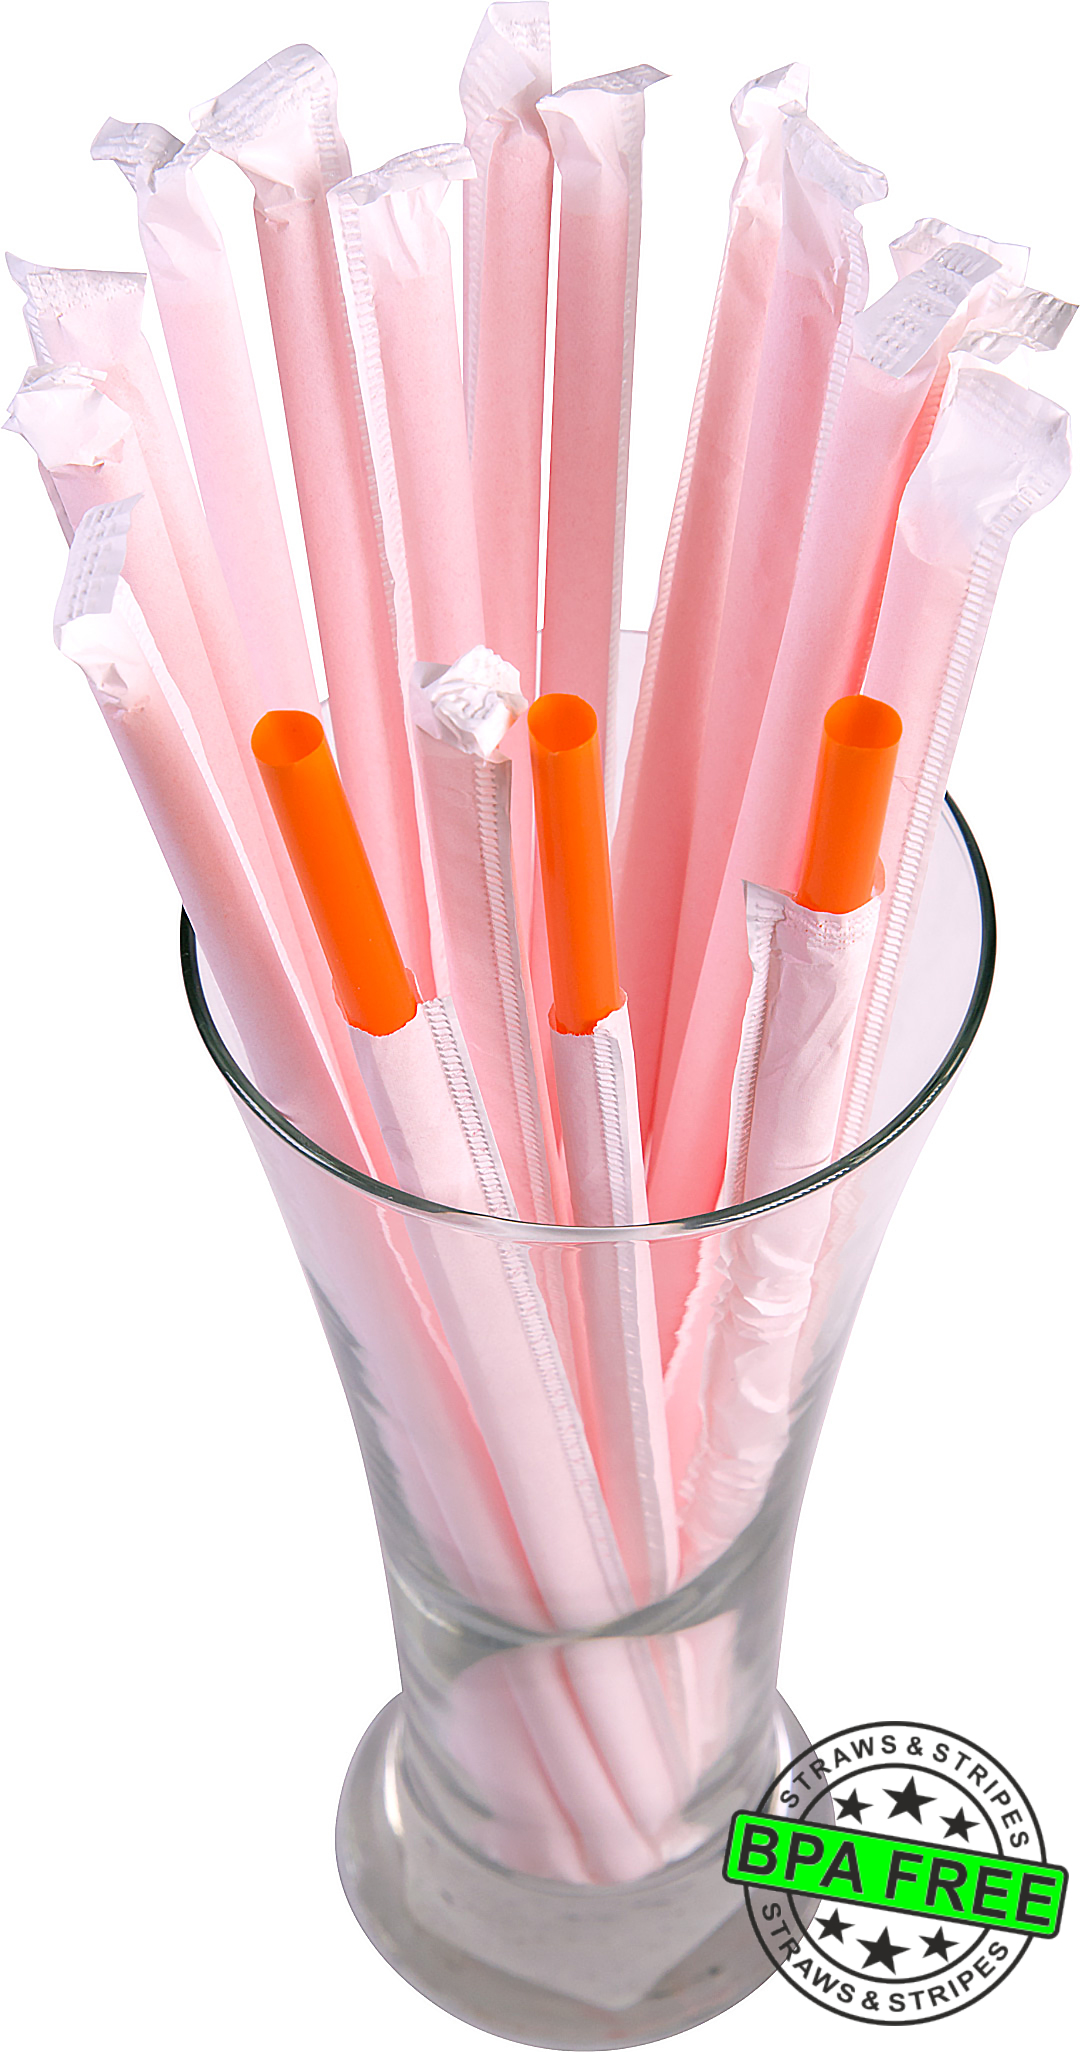 1 CASE - 2,500 (10x250) PAPER WRAPPED SMOOTHIE drinking straws 10 x 0.28 inch - color: orange